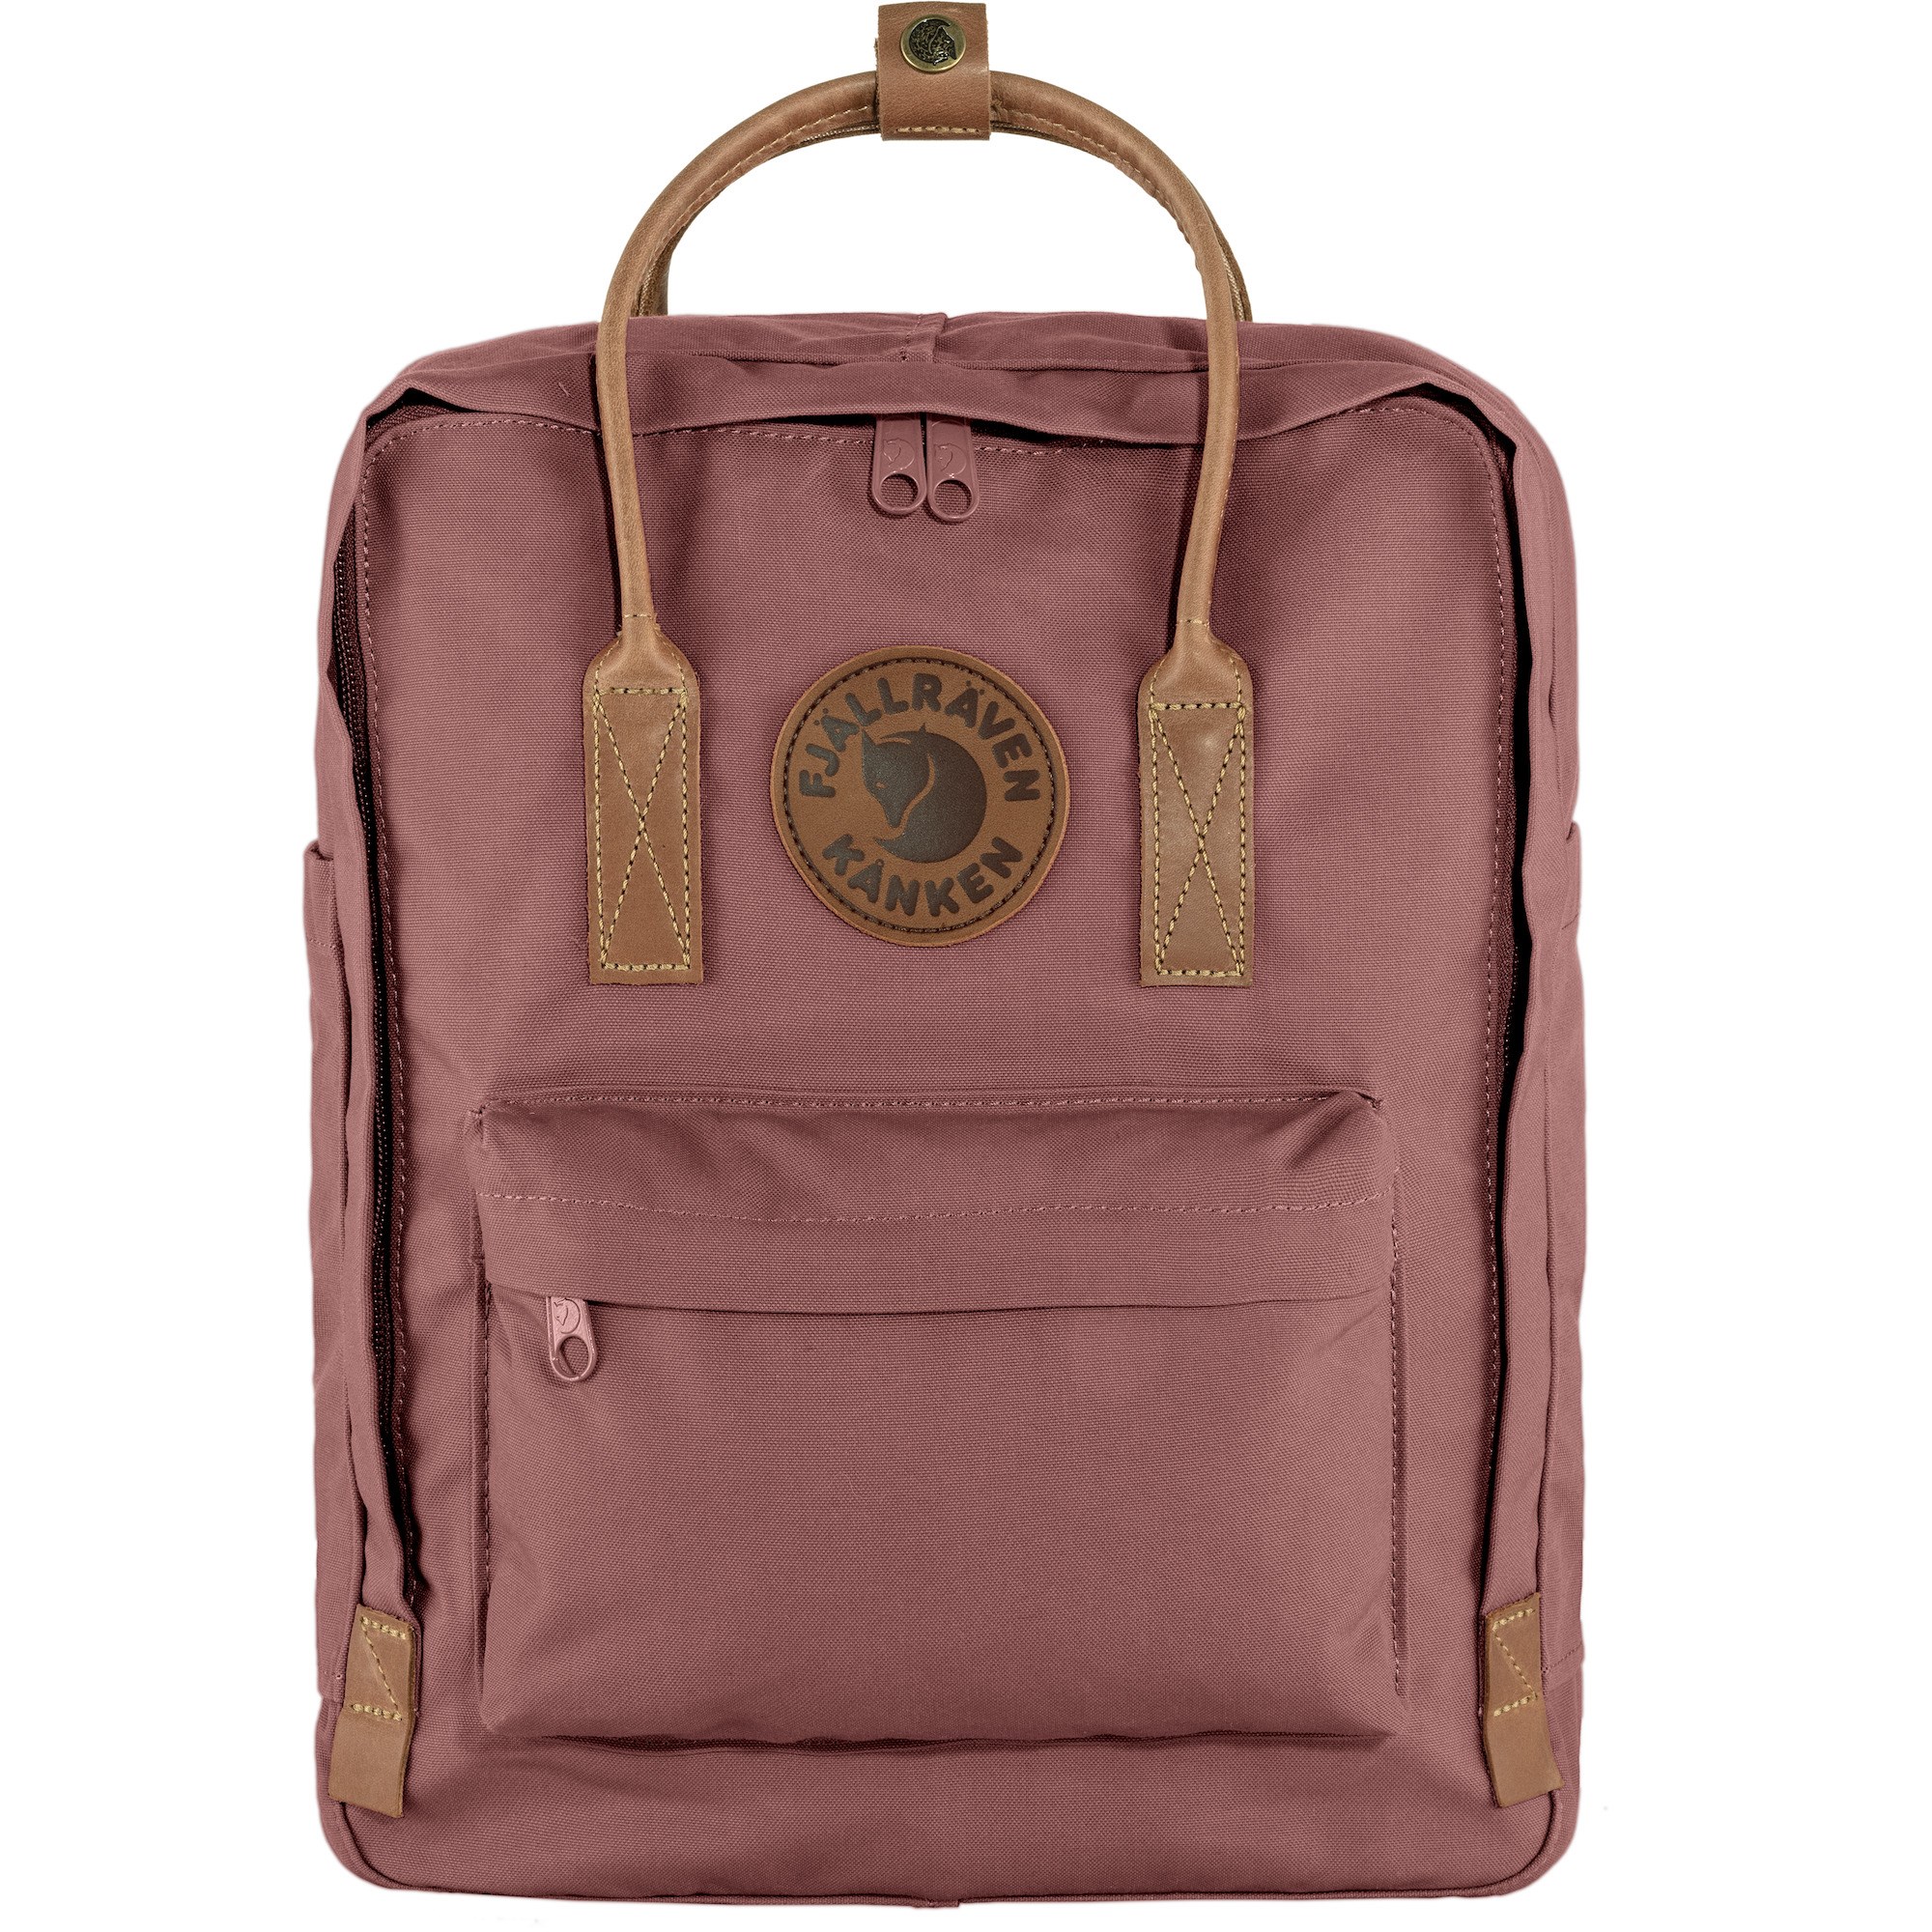 FJALLRAVEN KANKEN NO.2 Double Wax Heavy Duty Leather Backpack 16L 8 colors